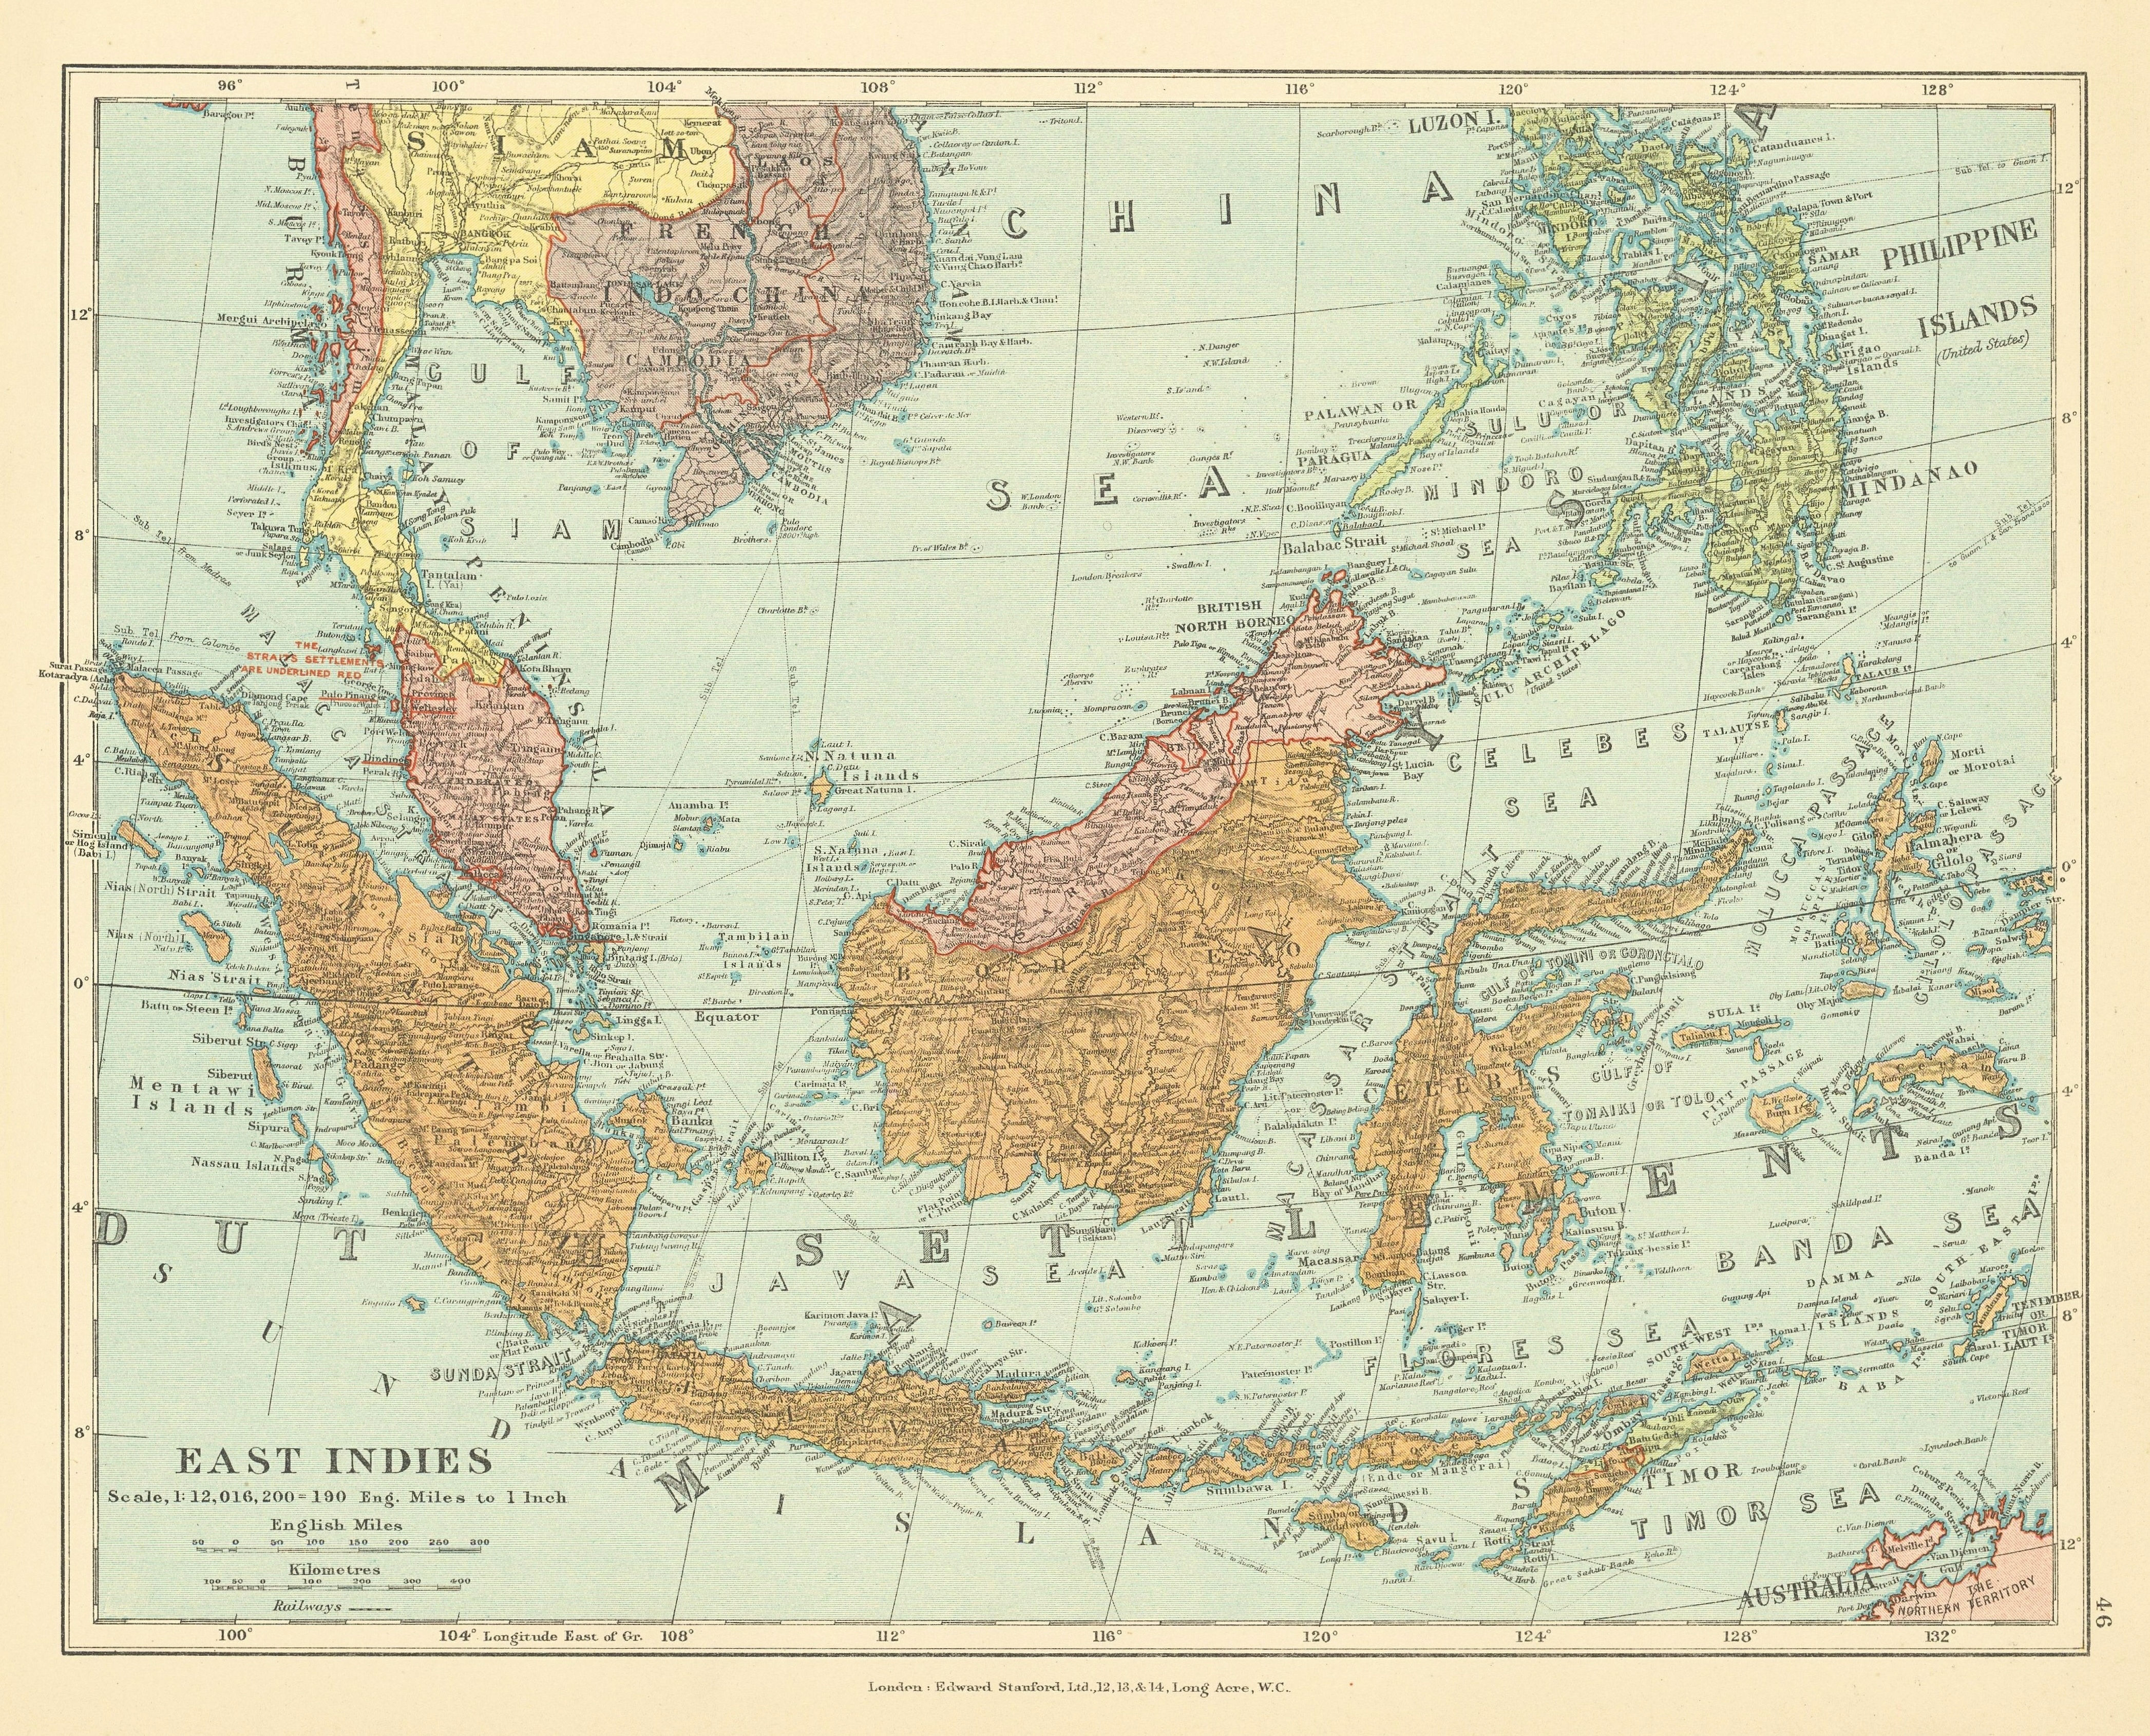 East Indies Indonesia Malaysia Straits Settlements Indochina STANFORD c1925 map